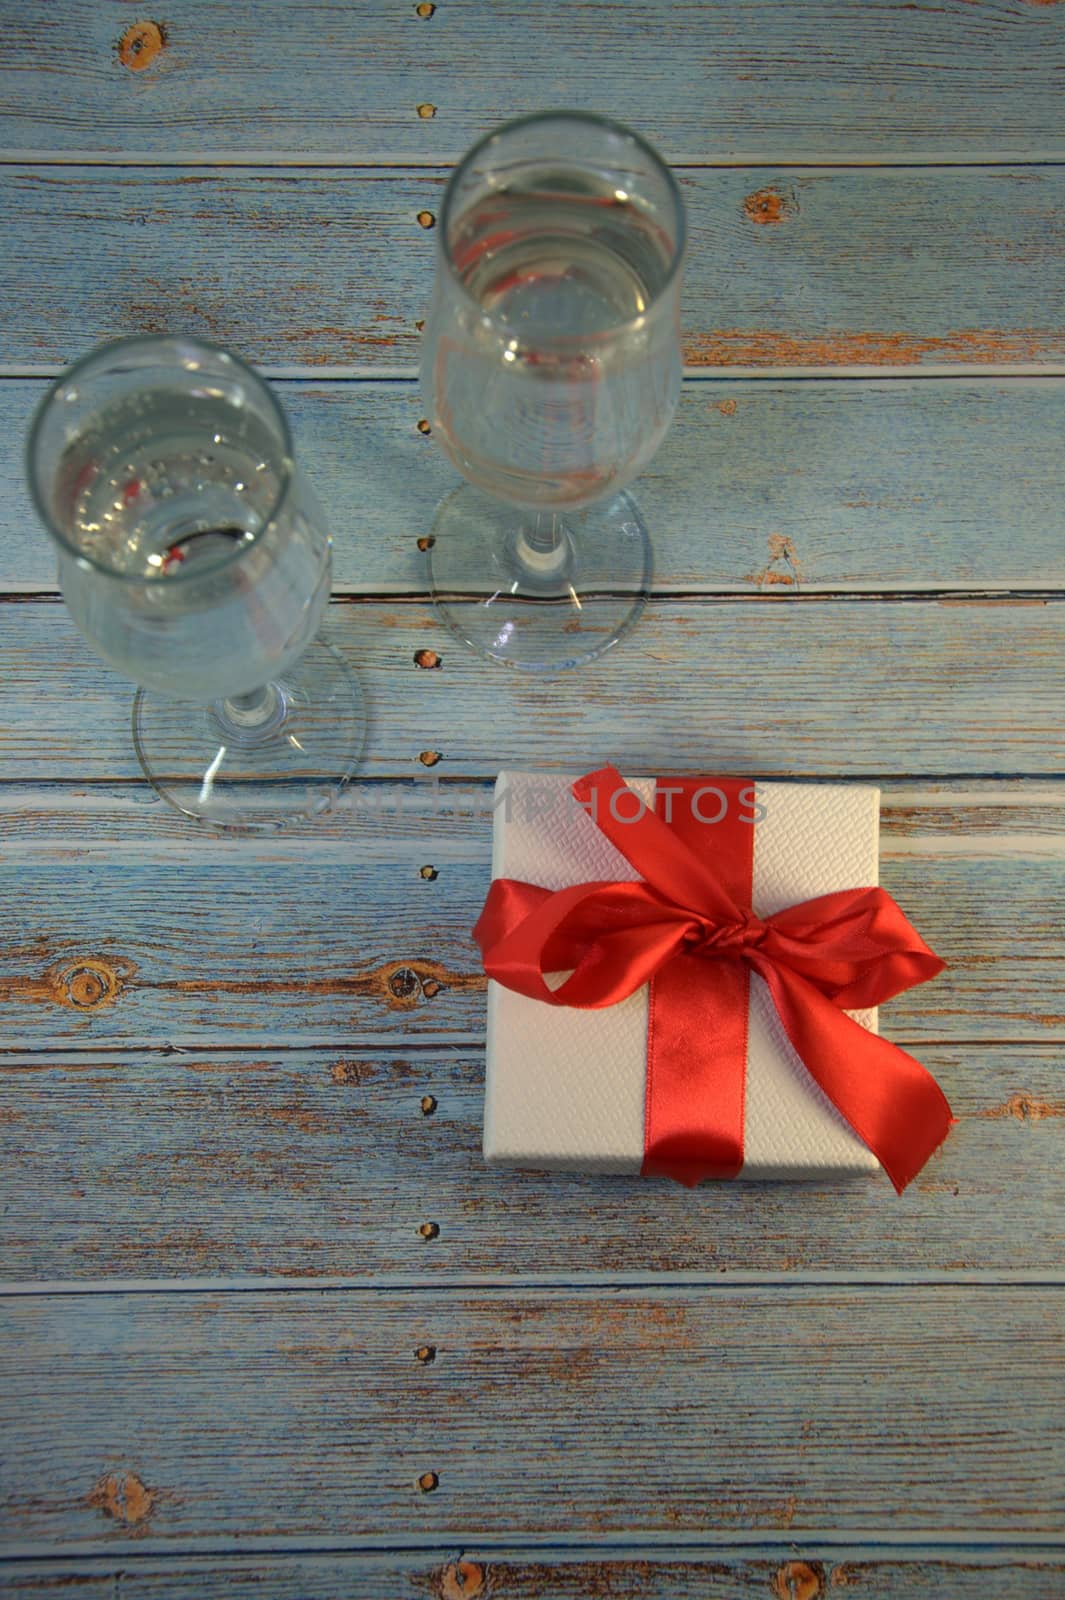 Two glasses with champagne and gift box with satin ribbon on a wooden table. by alexey_zheltukhin